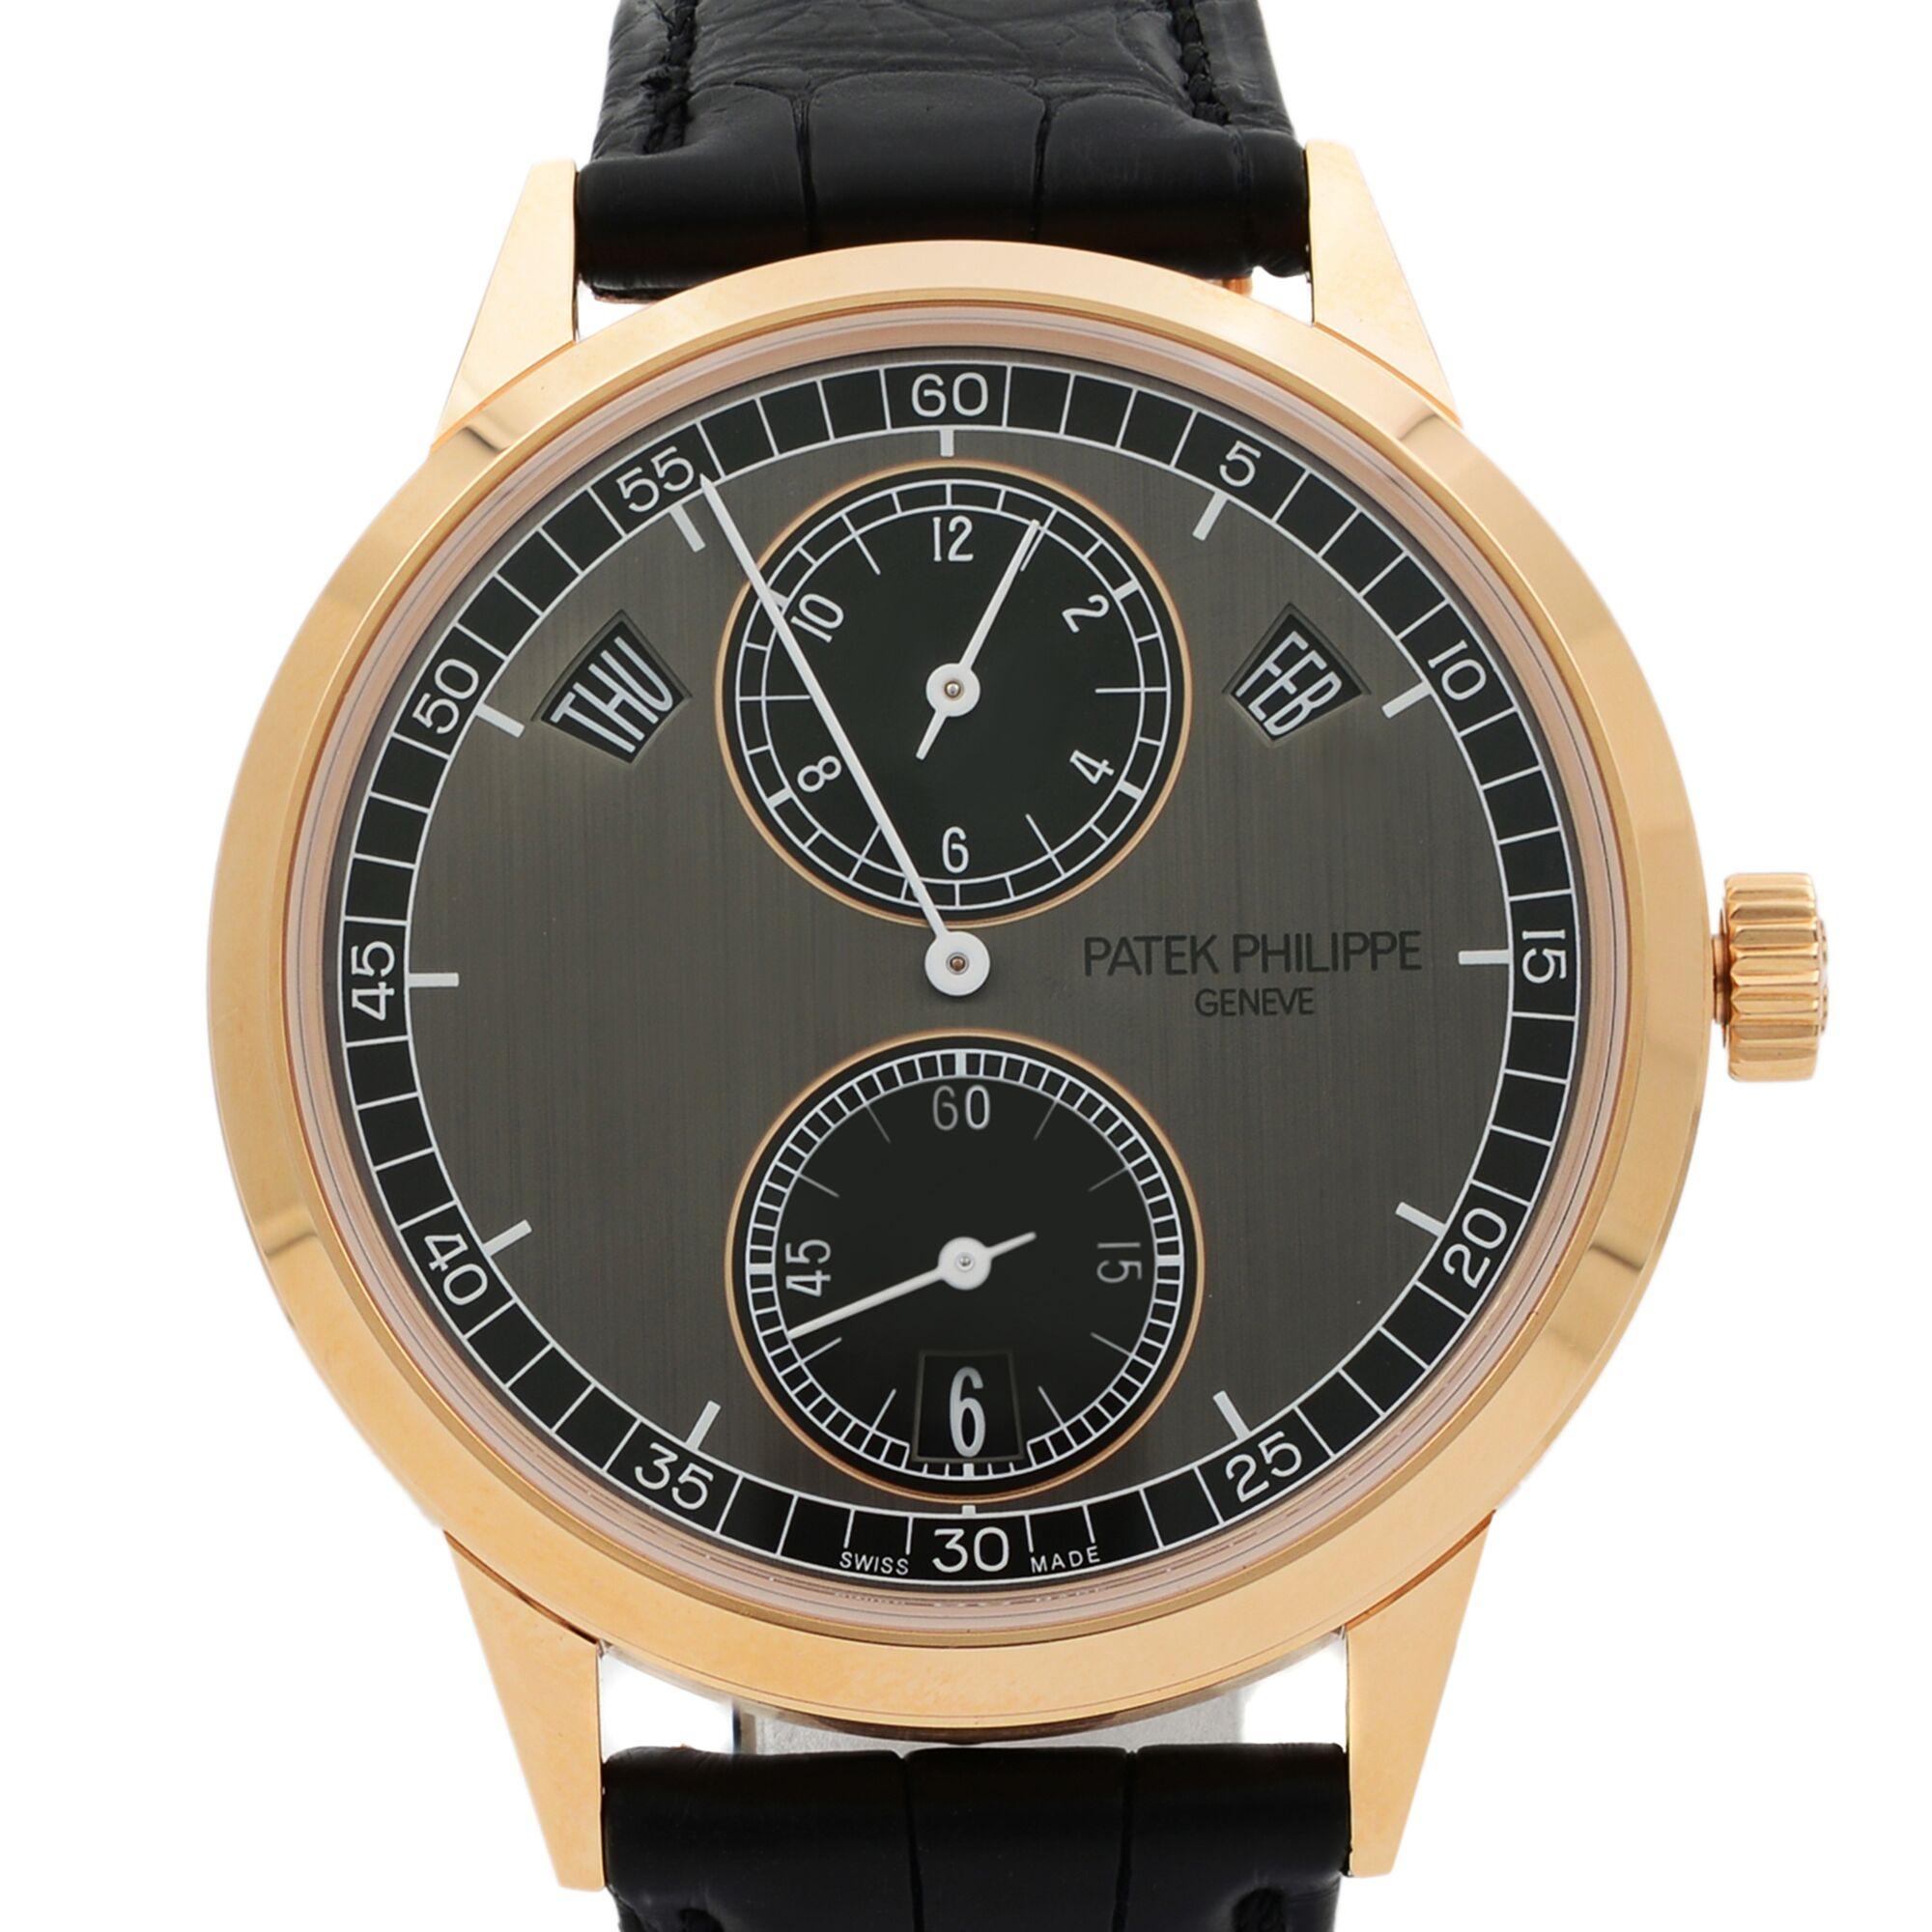 This never been worn Patek Philippe Complications 5235/50R-001 is a beautiful men's timepiece that is powered by mechanical (automatic) movement which is cased in a rose gold case. It has a round shape face, dial and has hand arabic numerals style